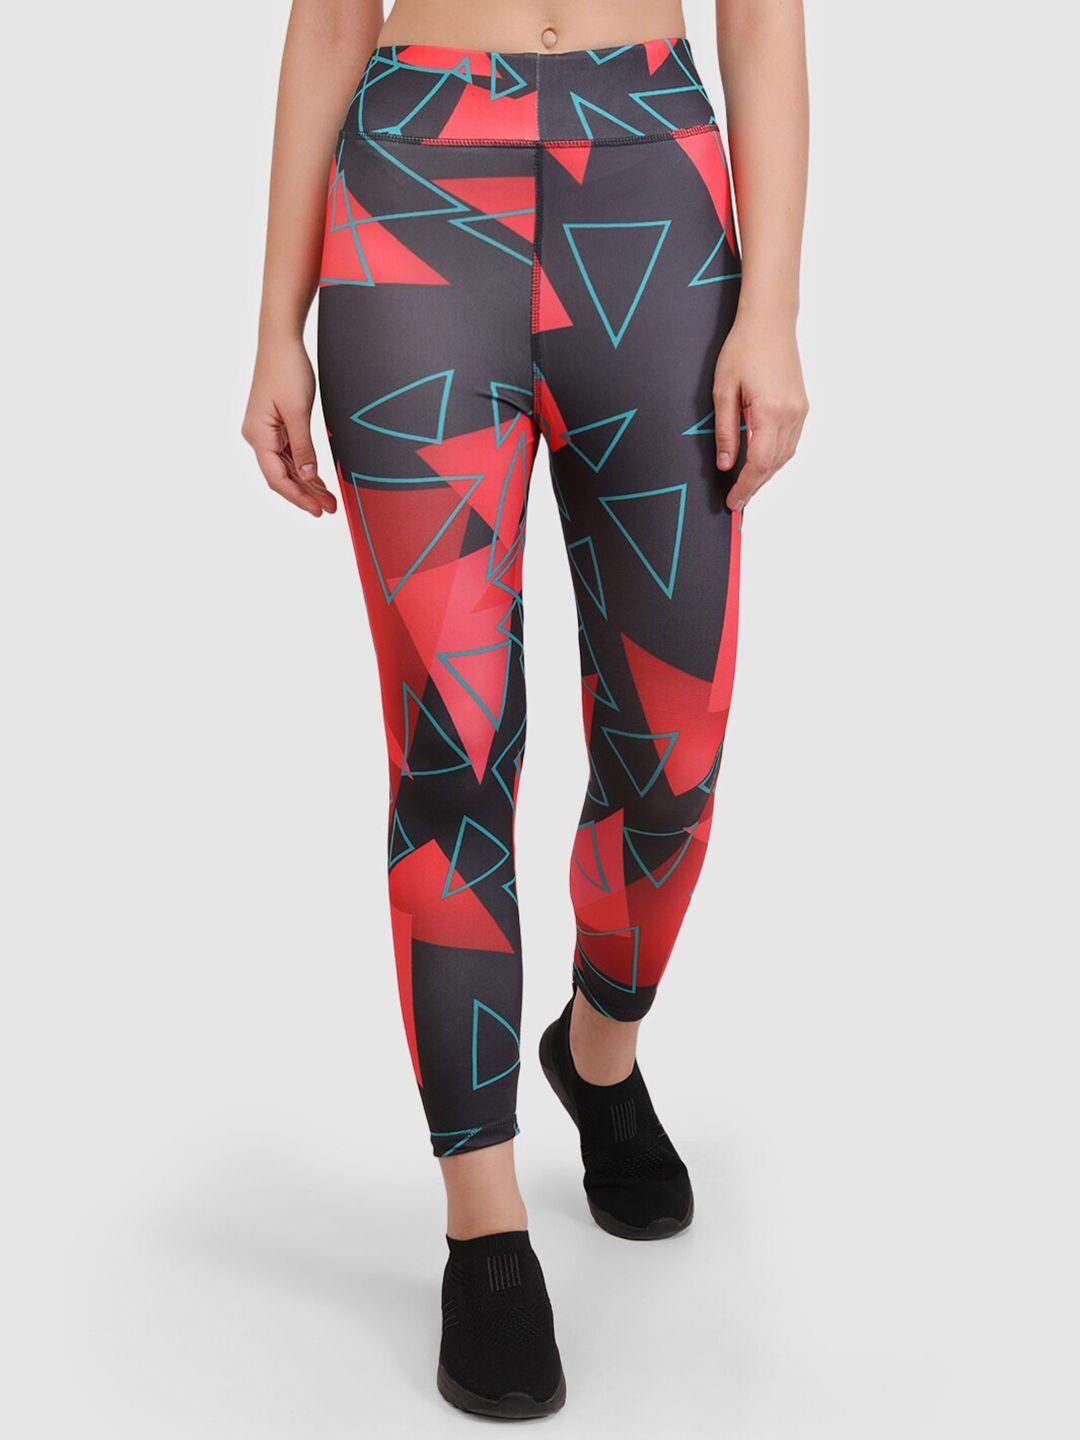 brachy printed dry-fit sports tights